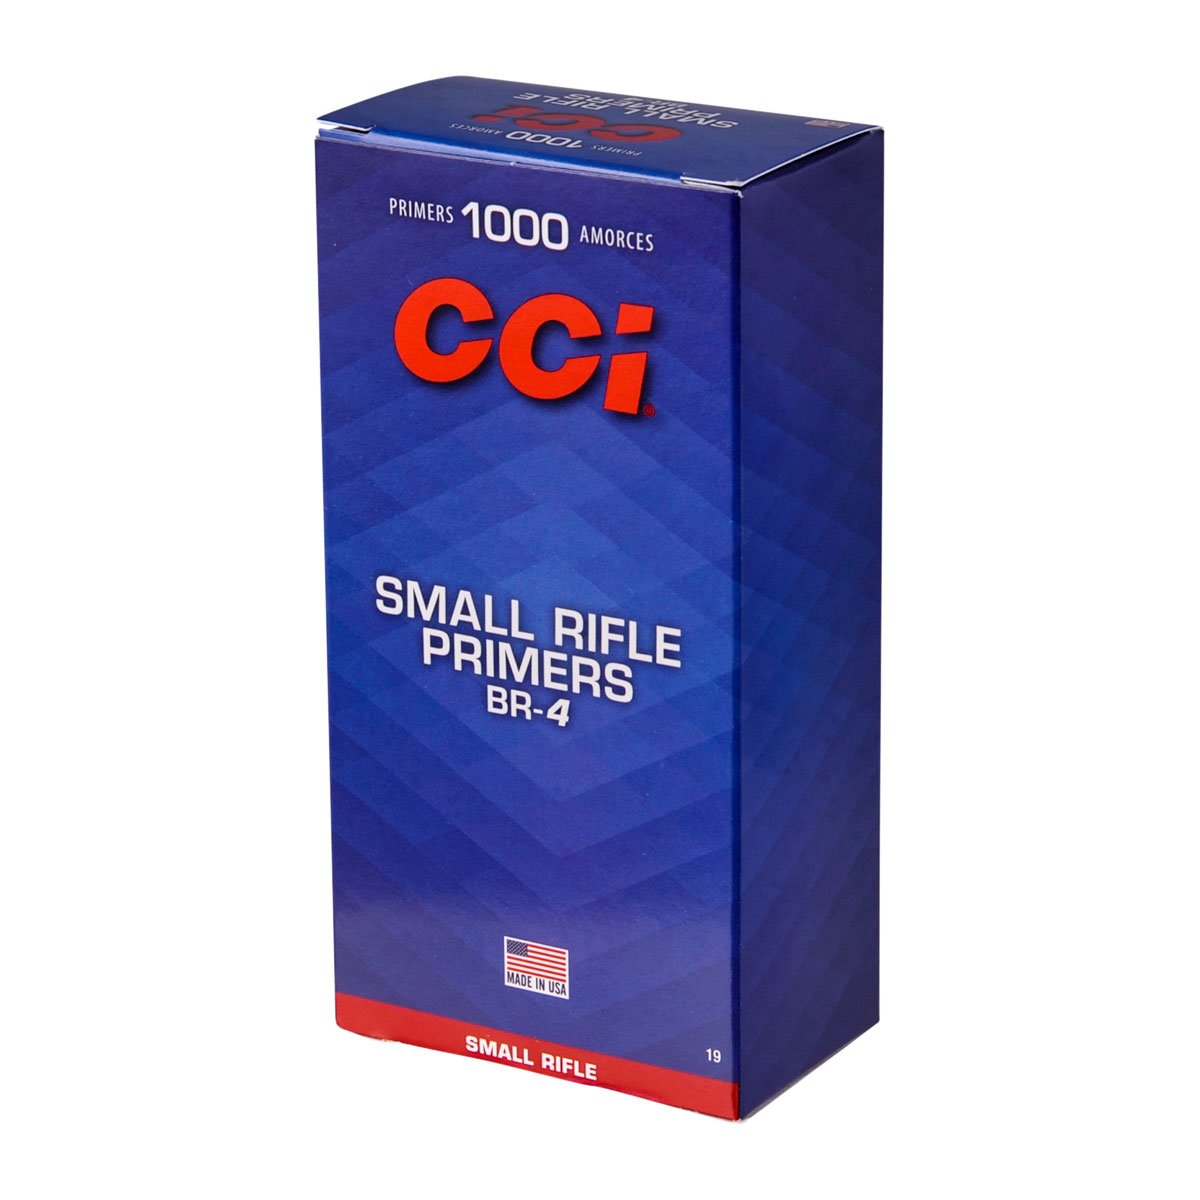 CCI - SMALL RIFLE BENCHREST PRIMERS